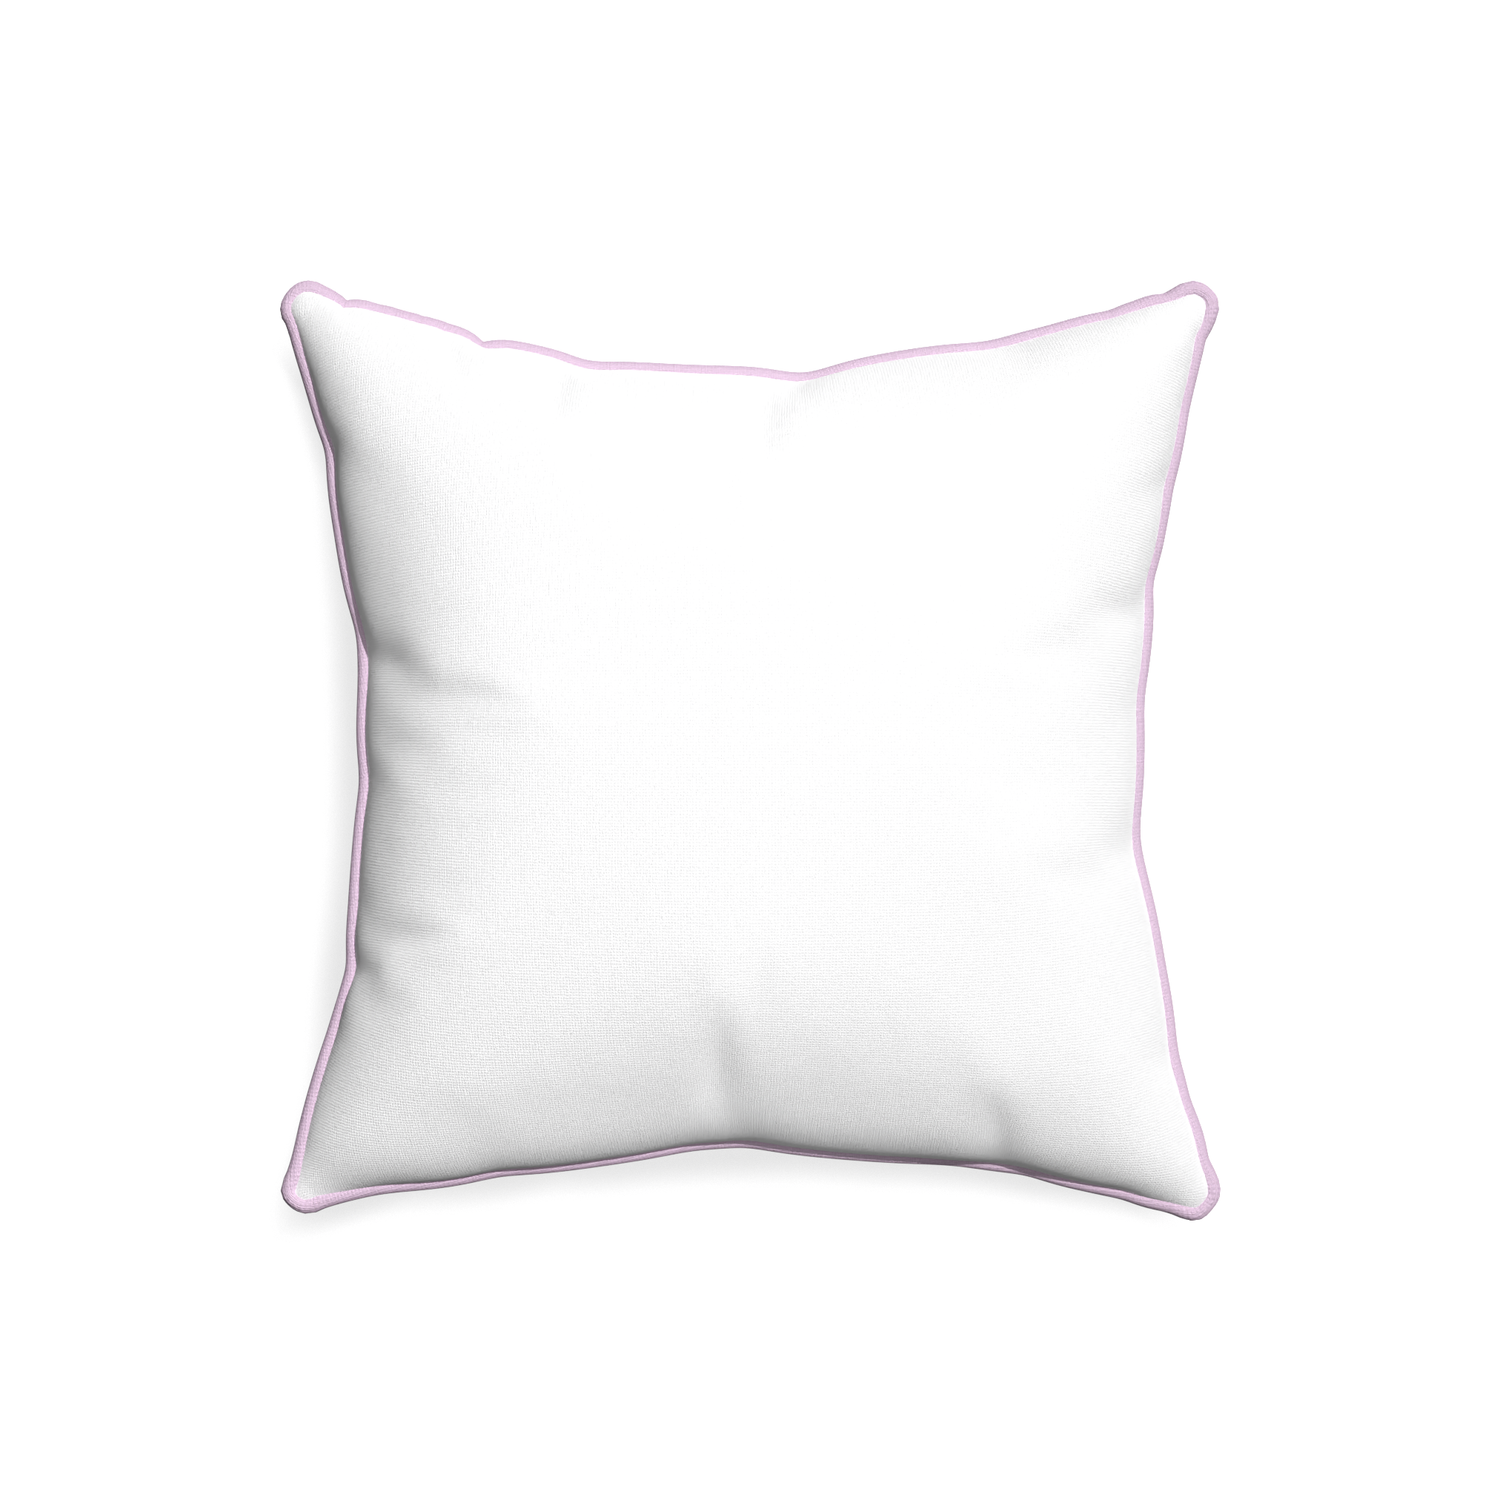 20-square snow custom white cottonpillow with l piping on white background